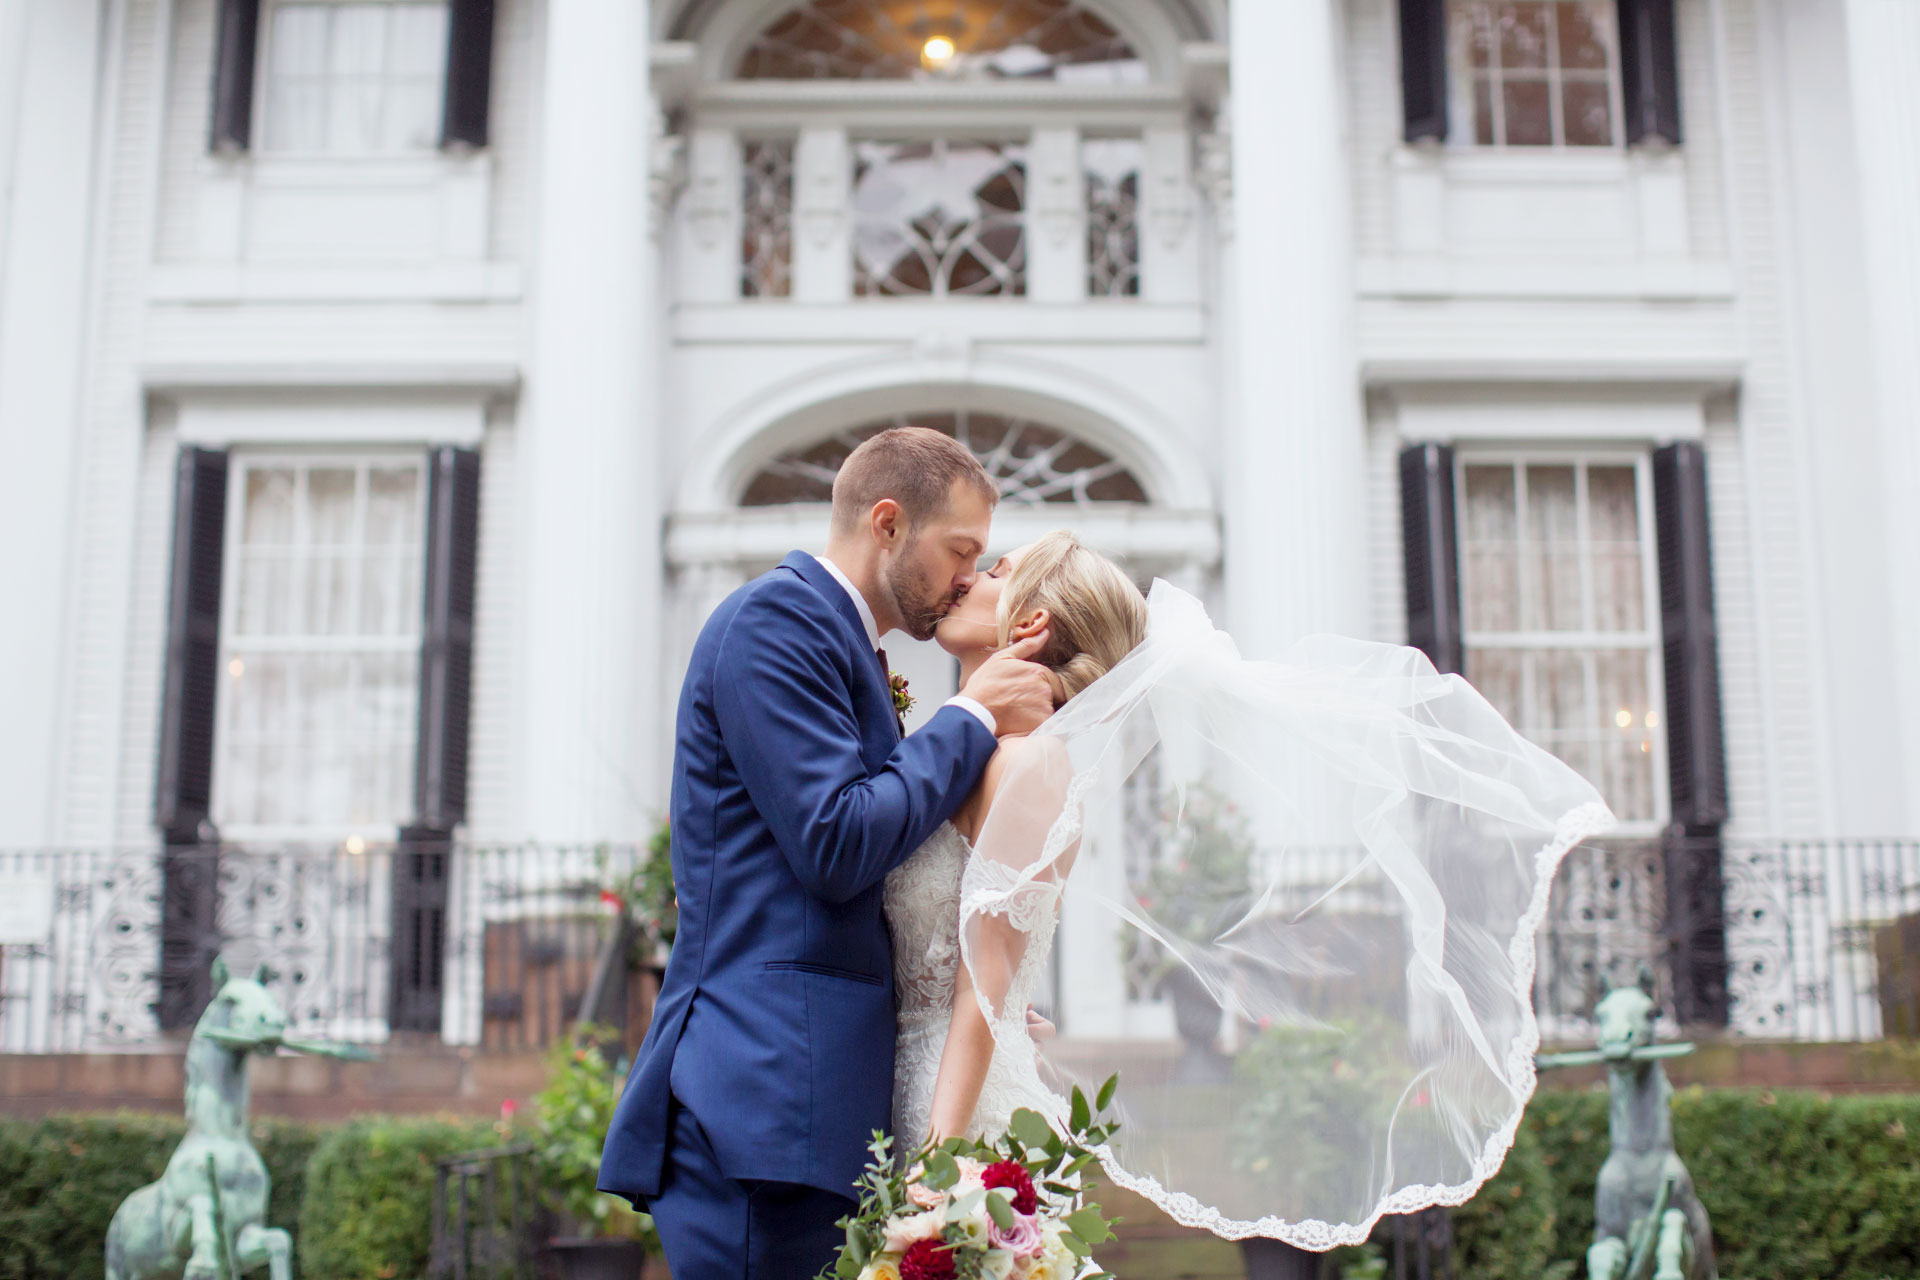 A bride and groom kissing in front of the misselwood estate.